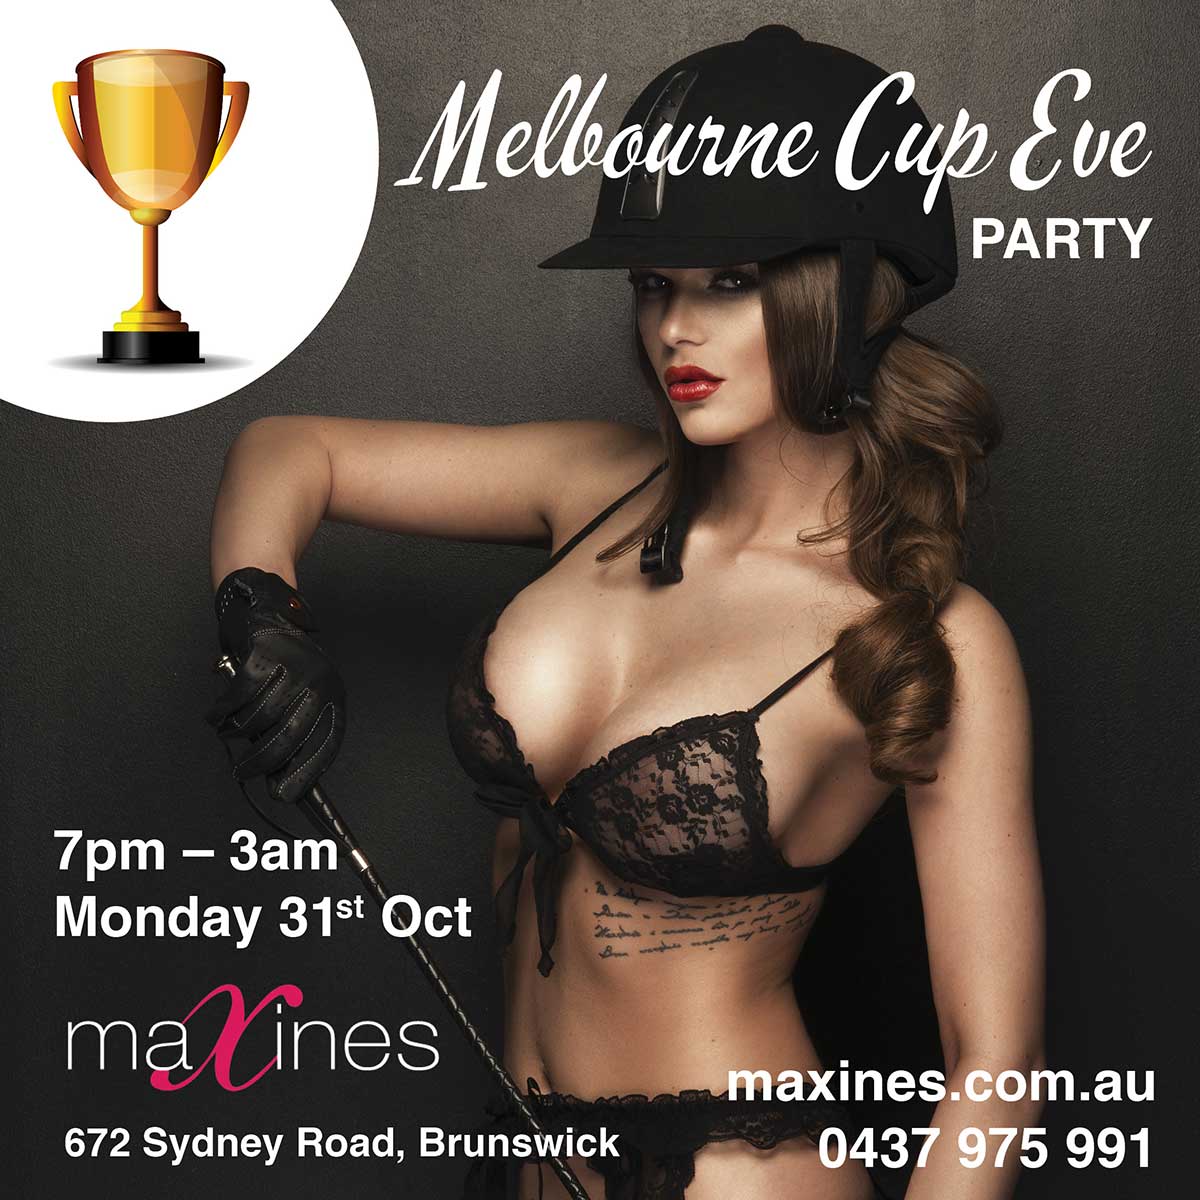 Melbourne Cup Eve Party at Maxines